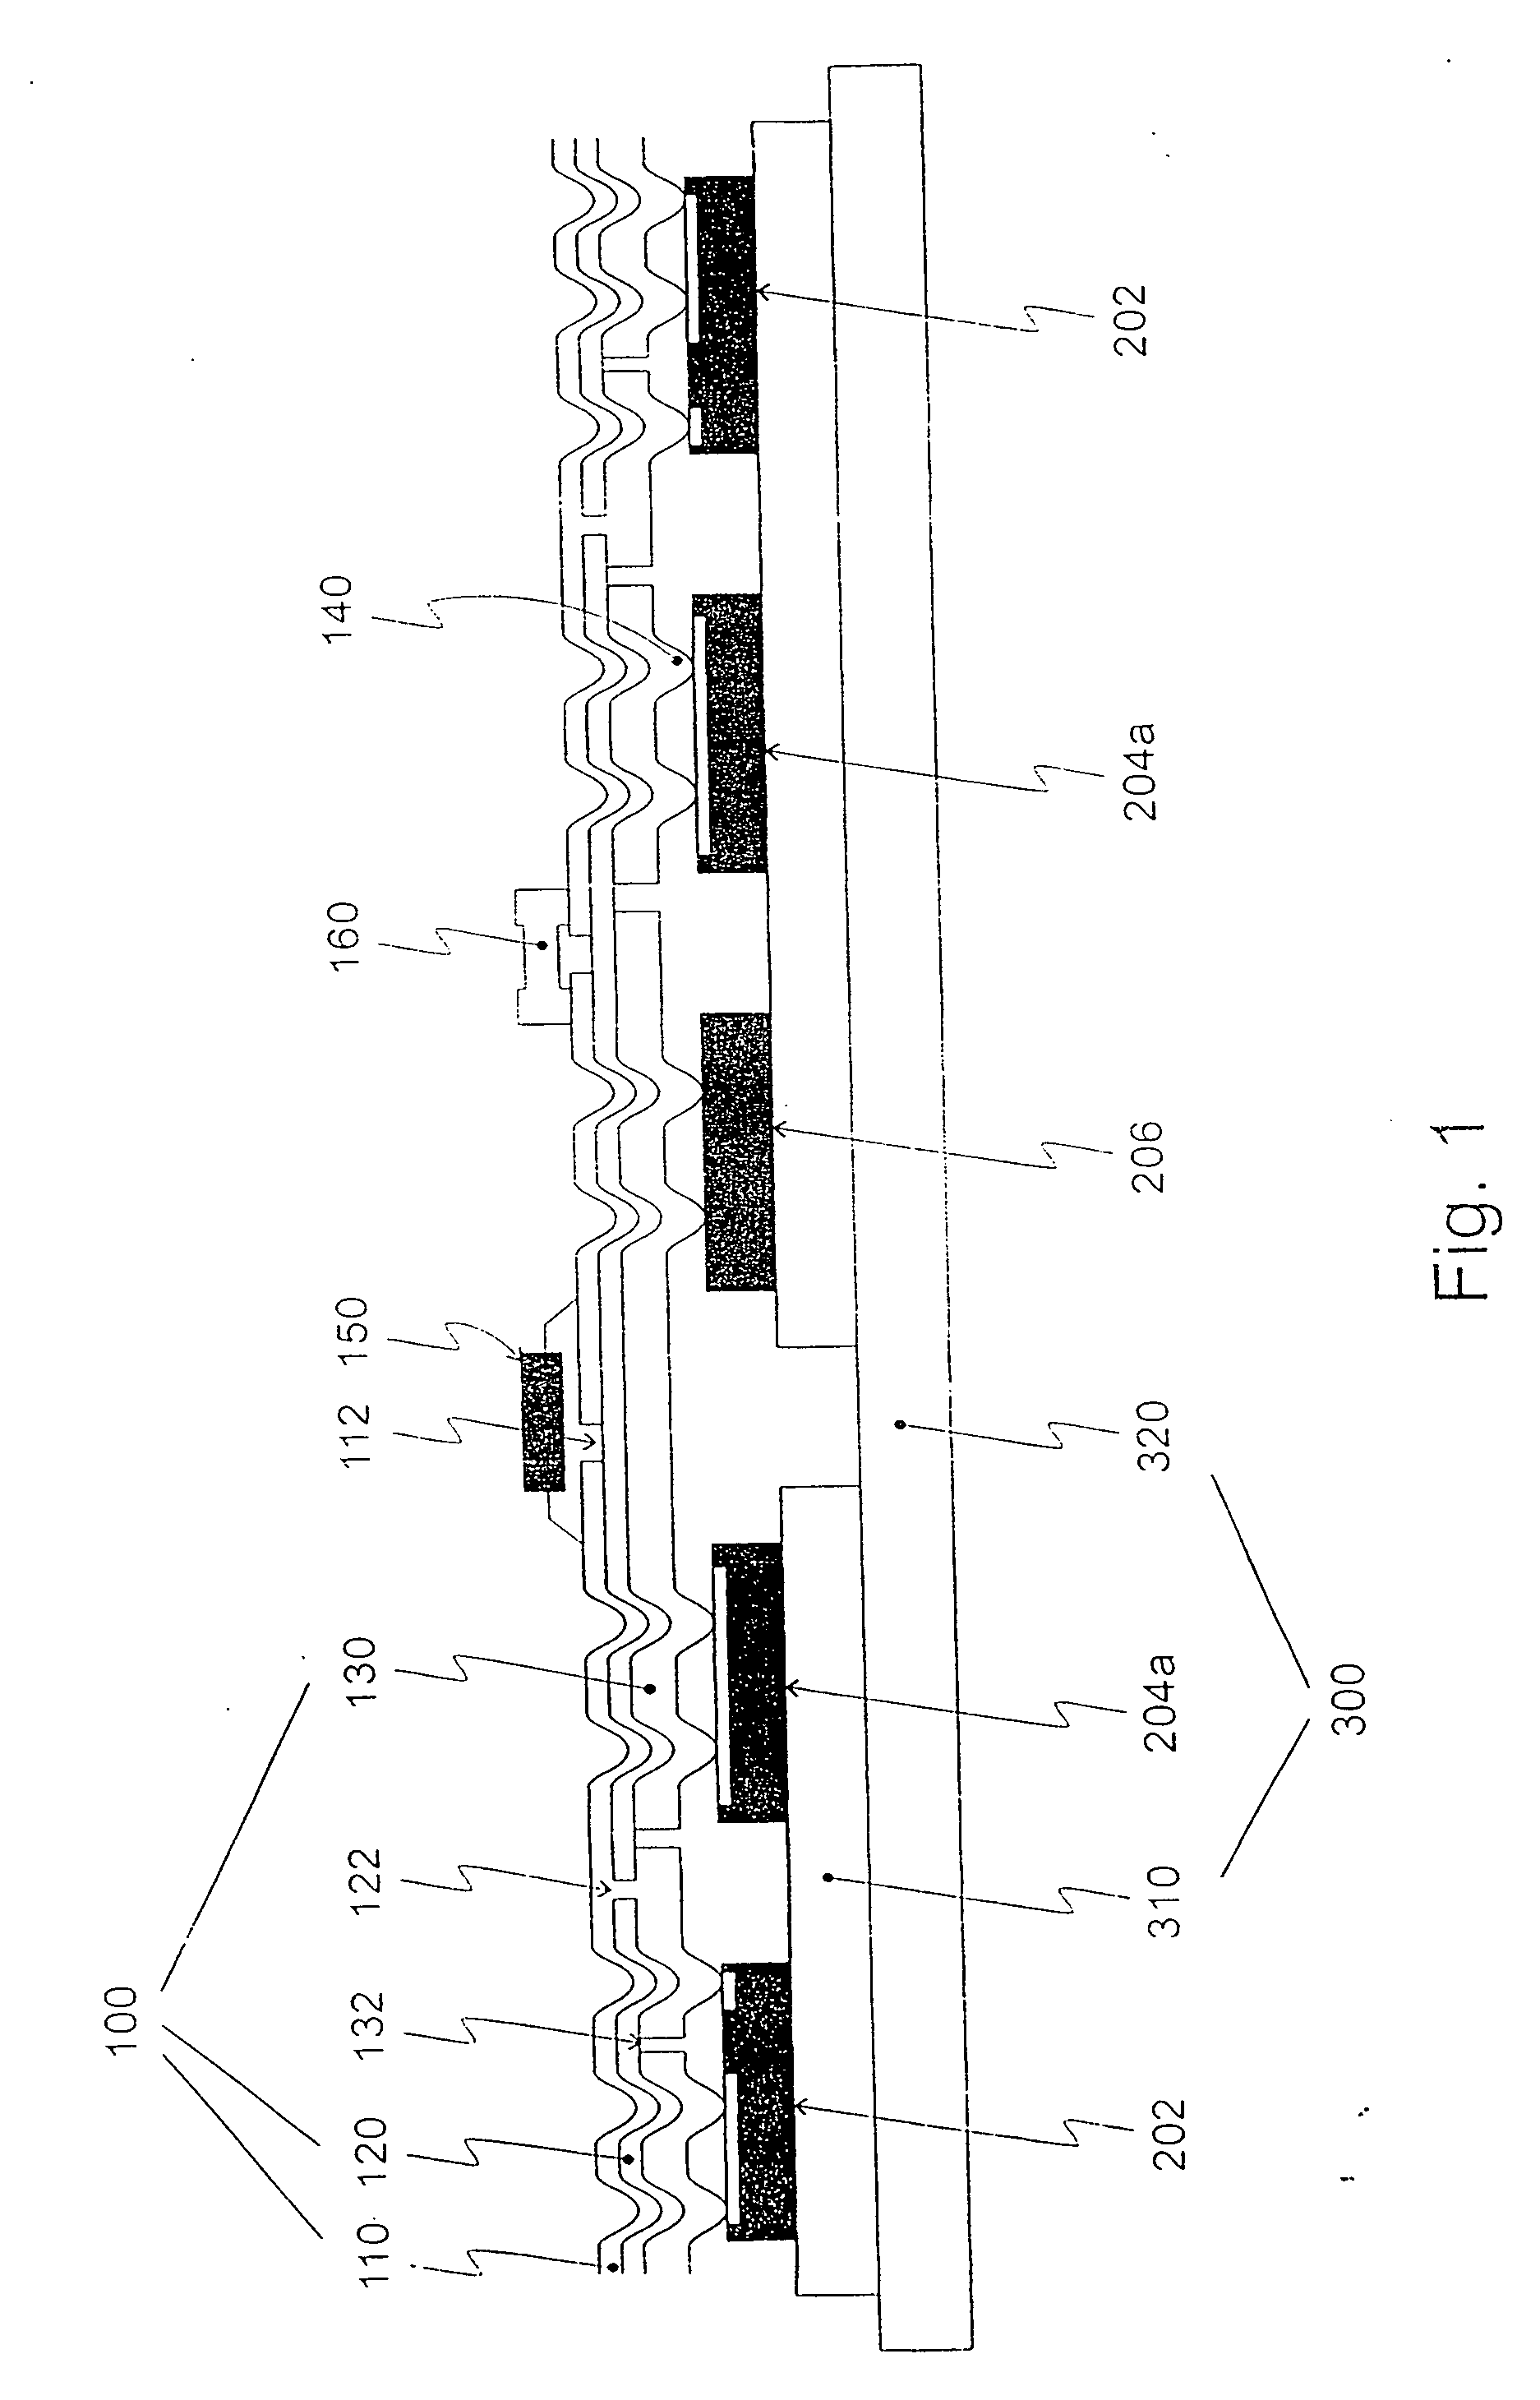 Power semiconductor module and method for producing it